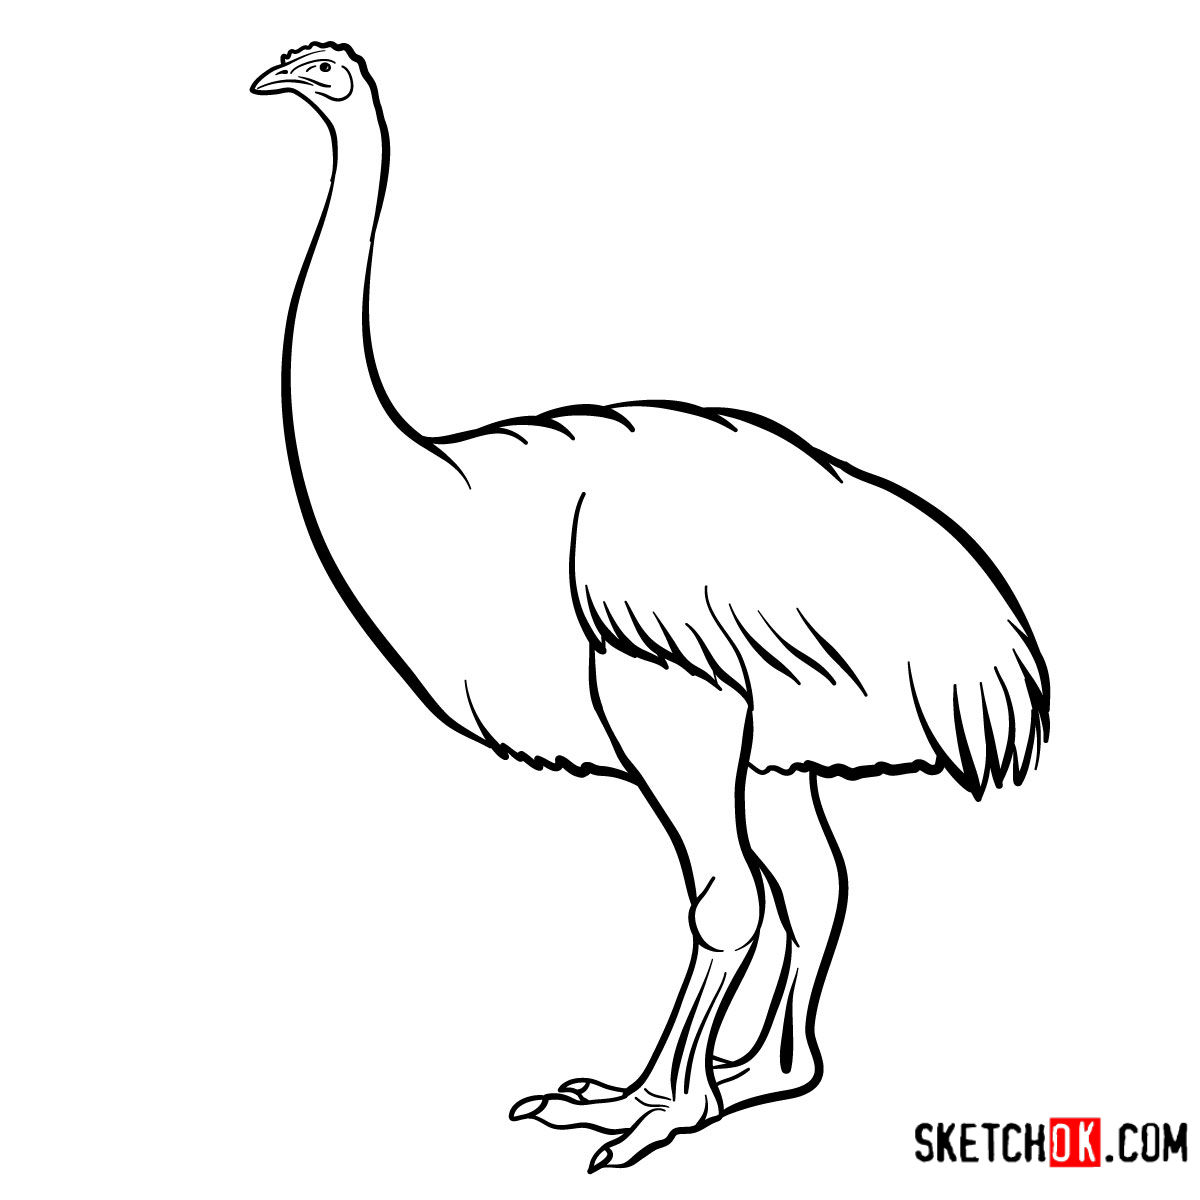 How to draw a Moa